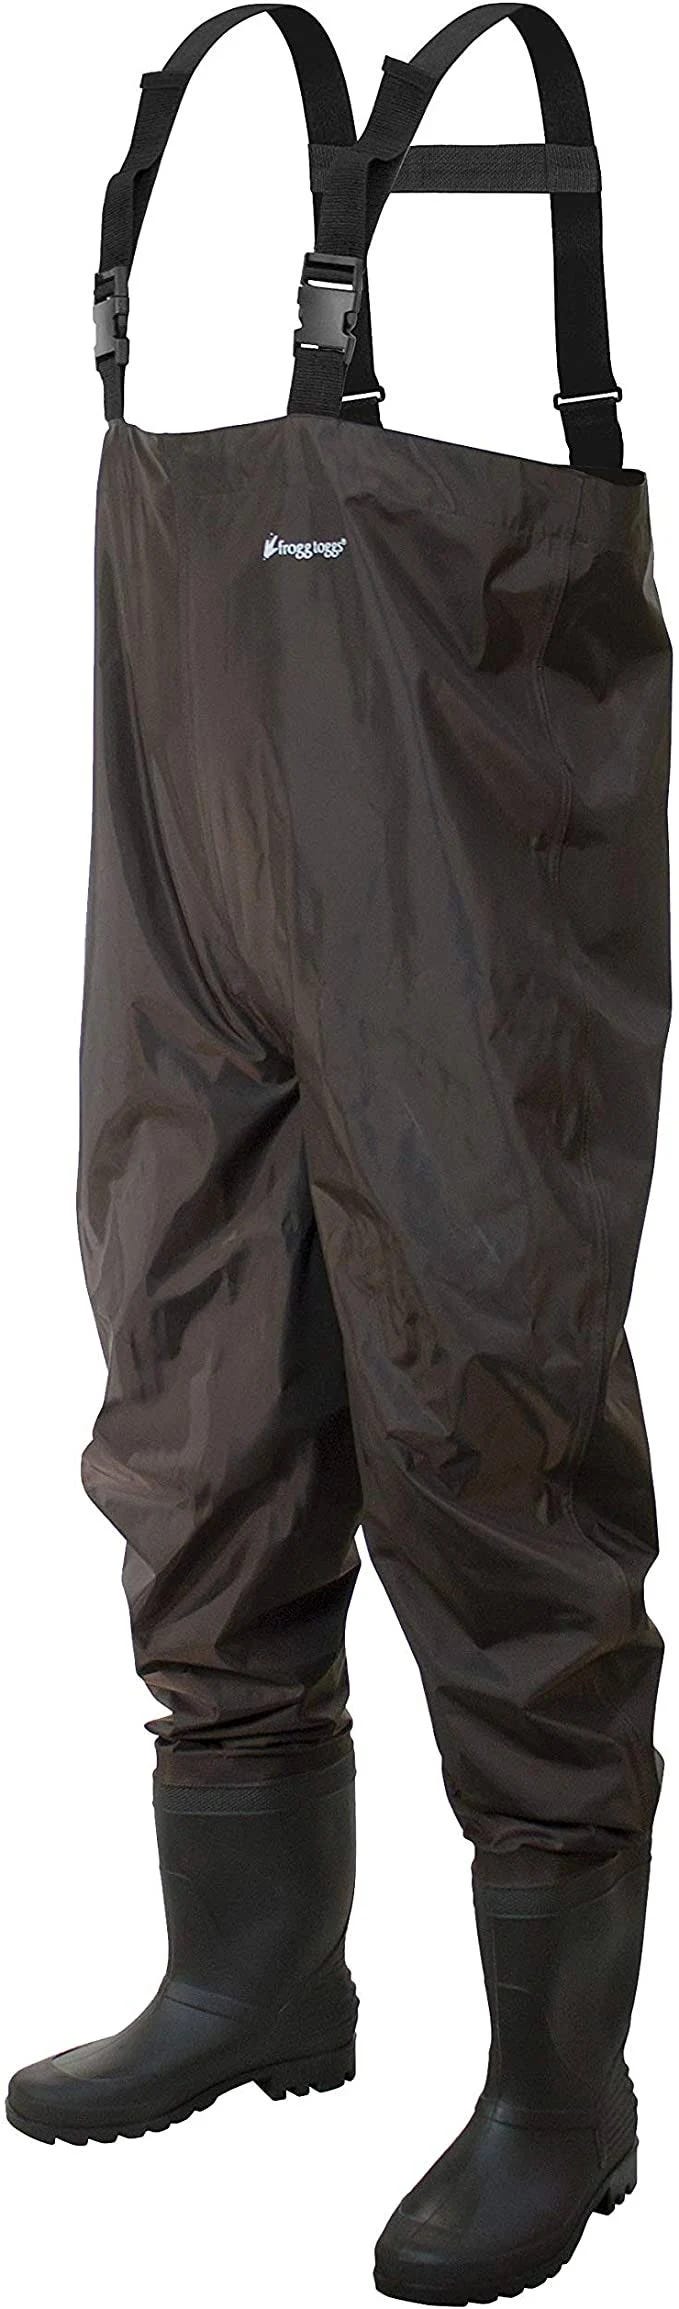 Rugged Full Body Waders for Outdoor Adventures | Image